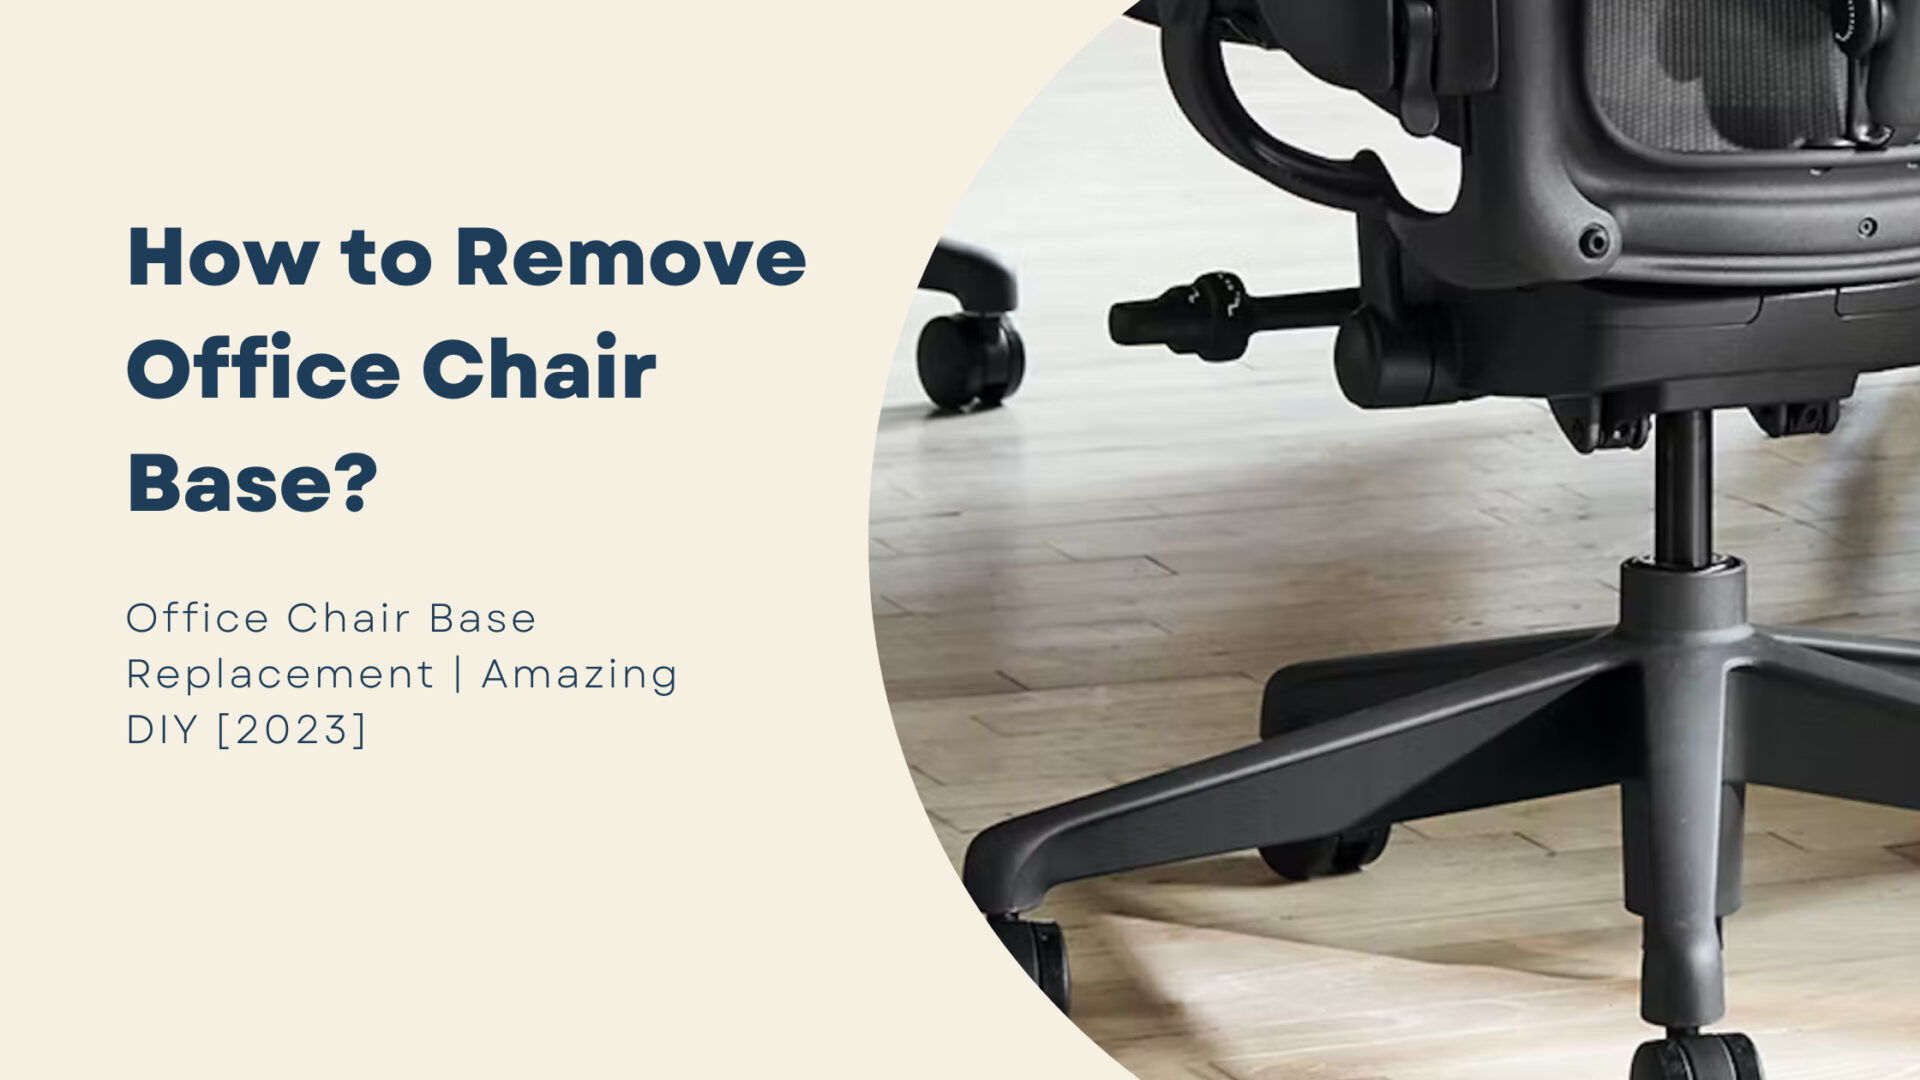 How to Remove Office Chair Base